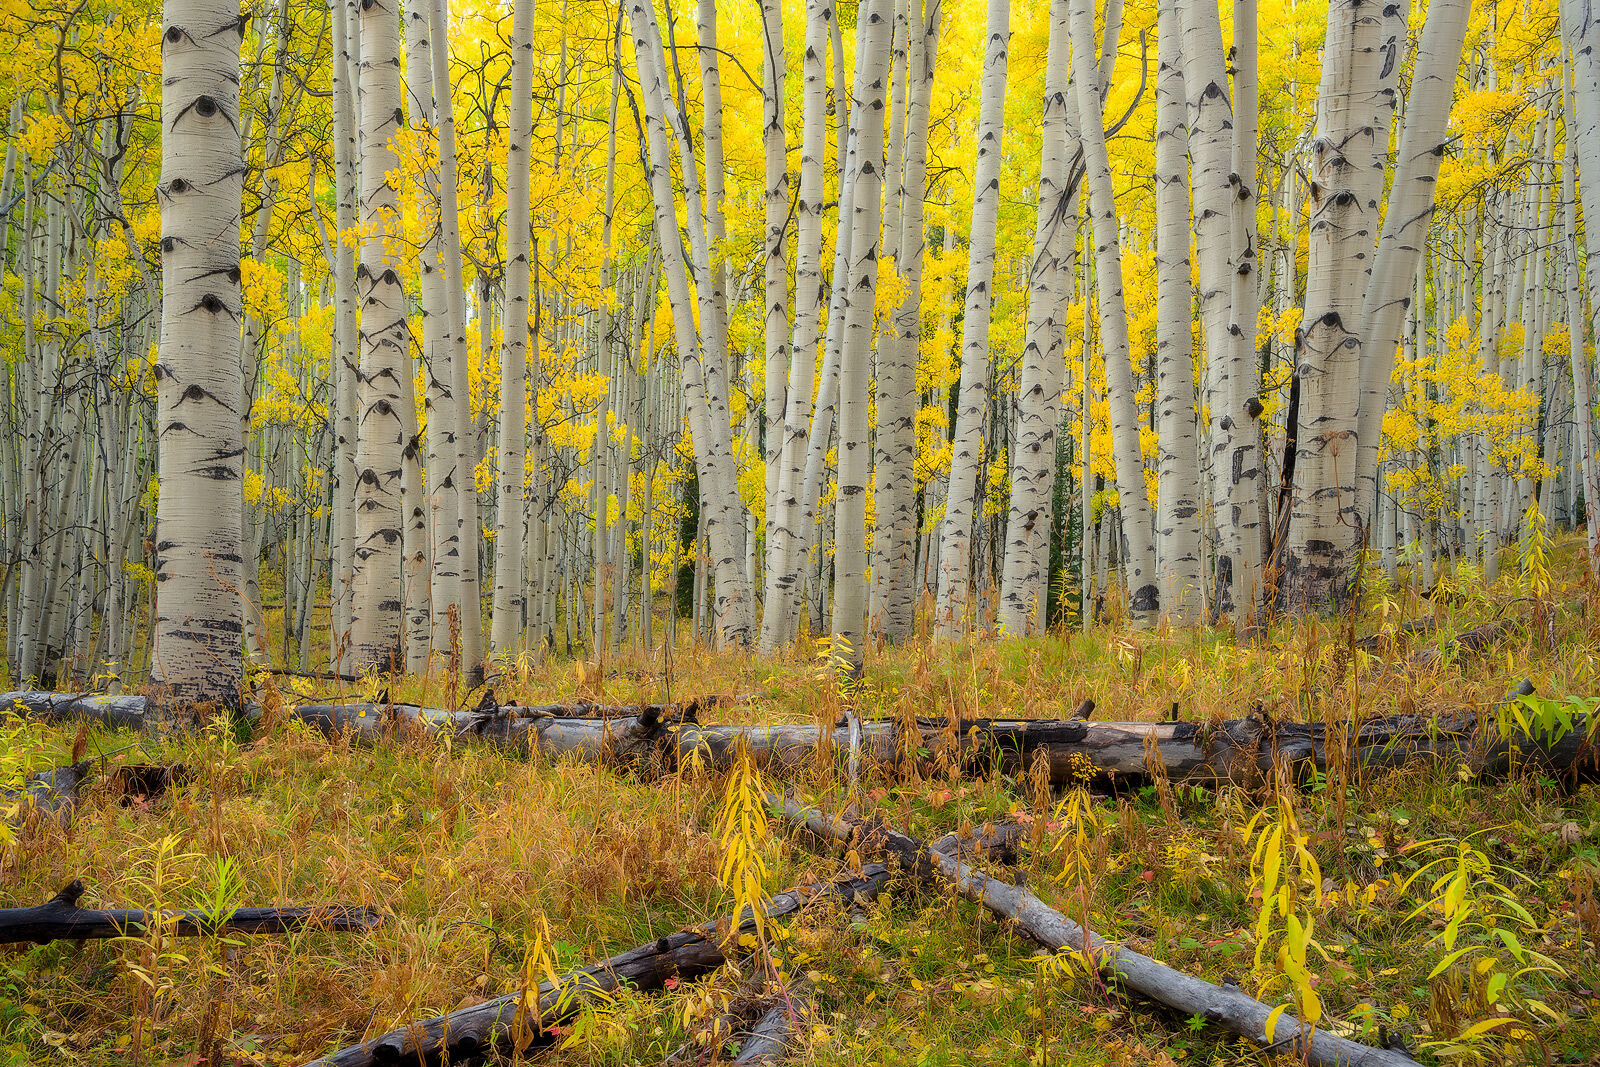 A forest floor with fallen, decaying trees at the front of the frame and an aspen forest filled with white tree trunks and bright yellow leaves.